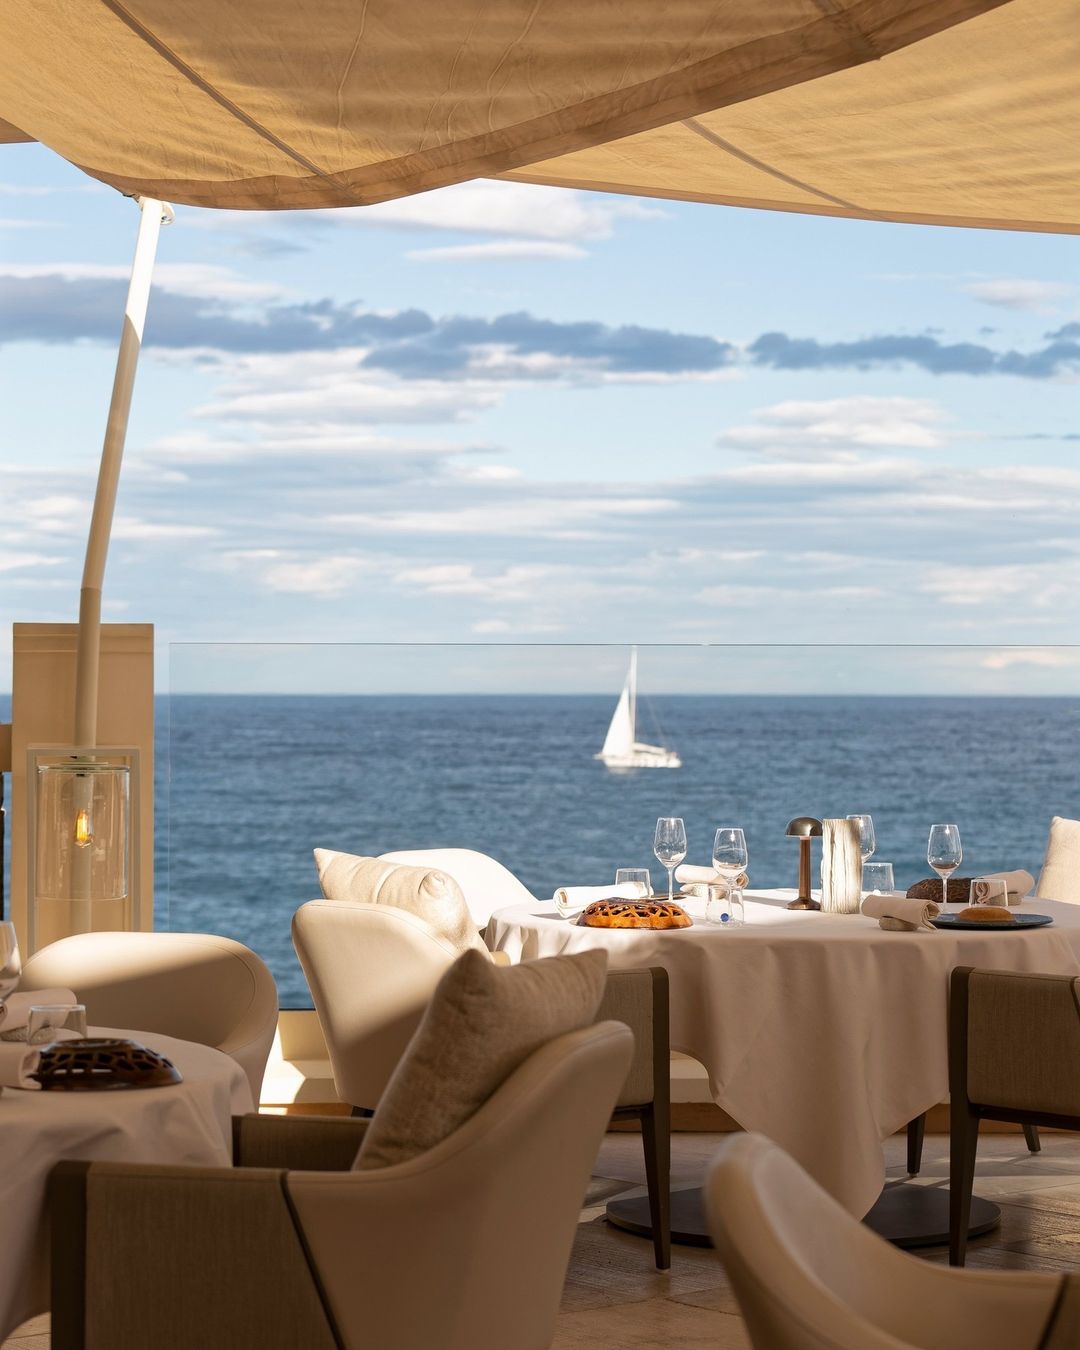 The breeze of summer evenings, while enjoying a refined menu and the splendid sea at Blue Bay Monaco